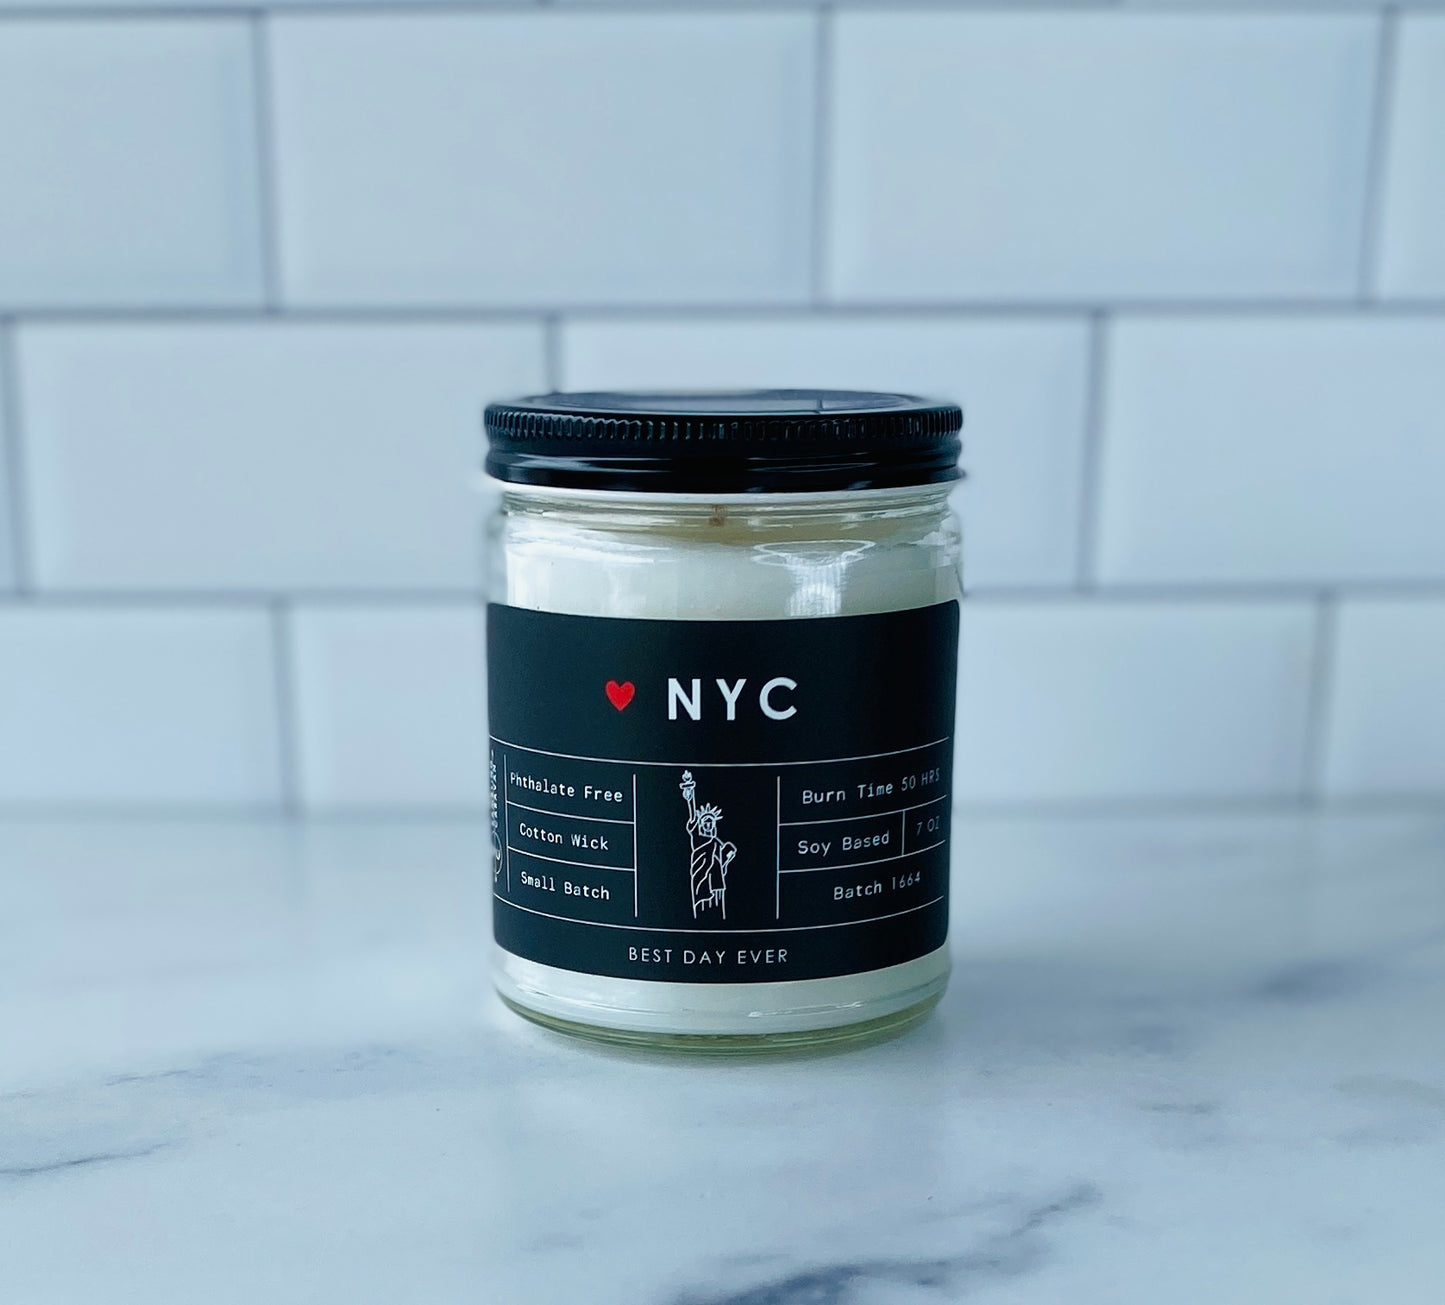 NYC, New York Candle